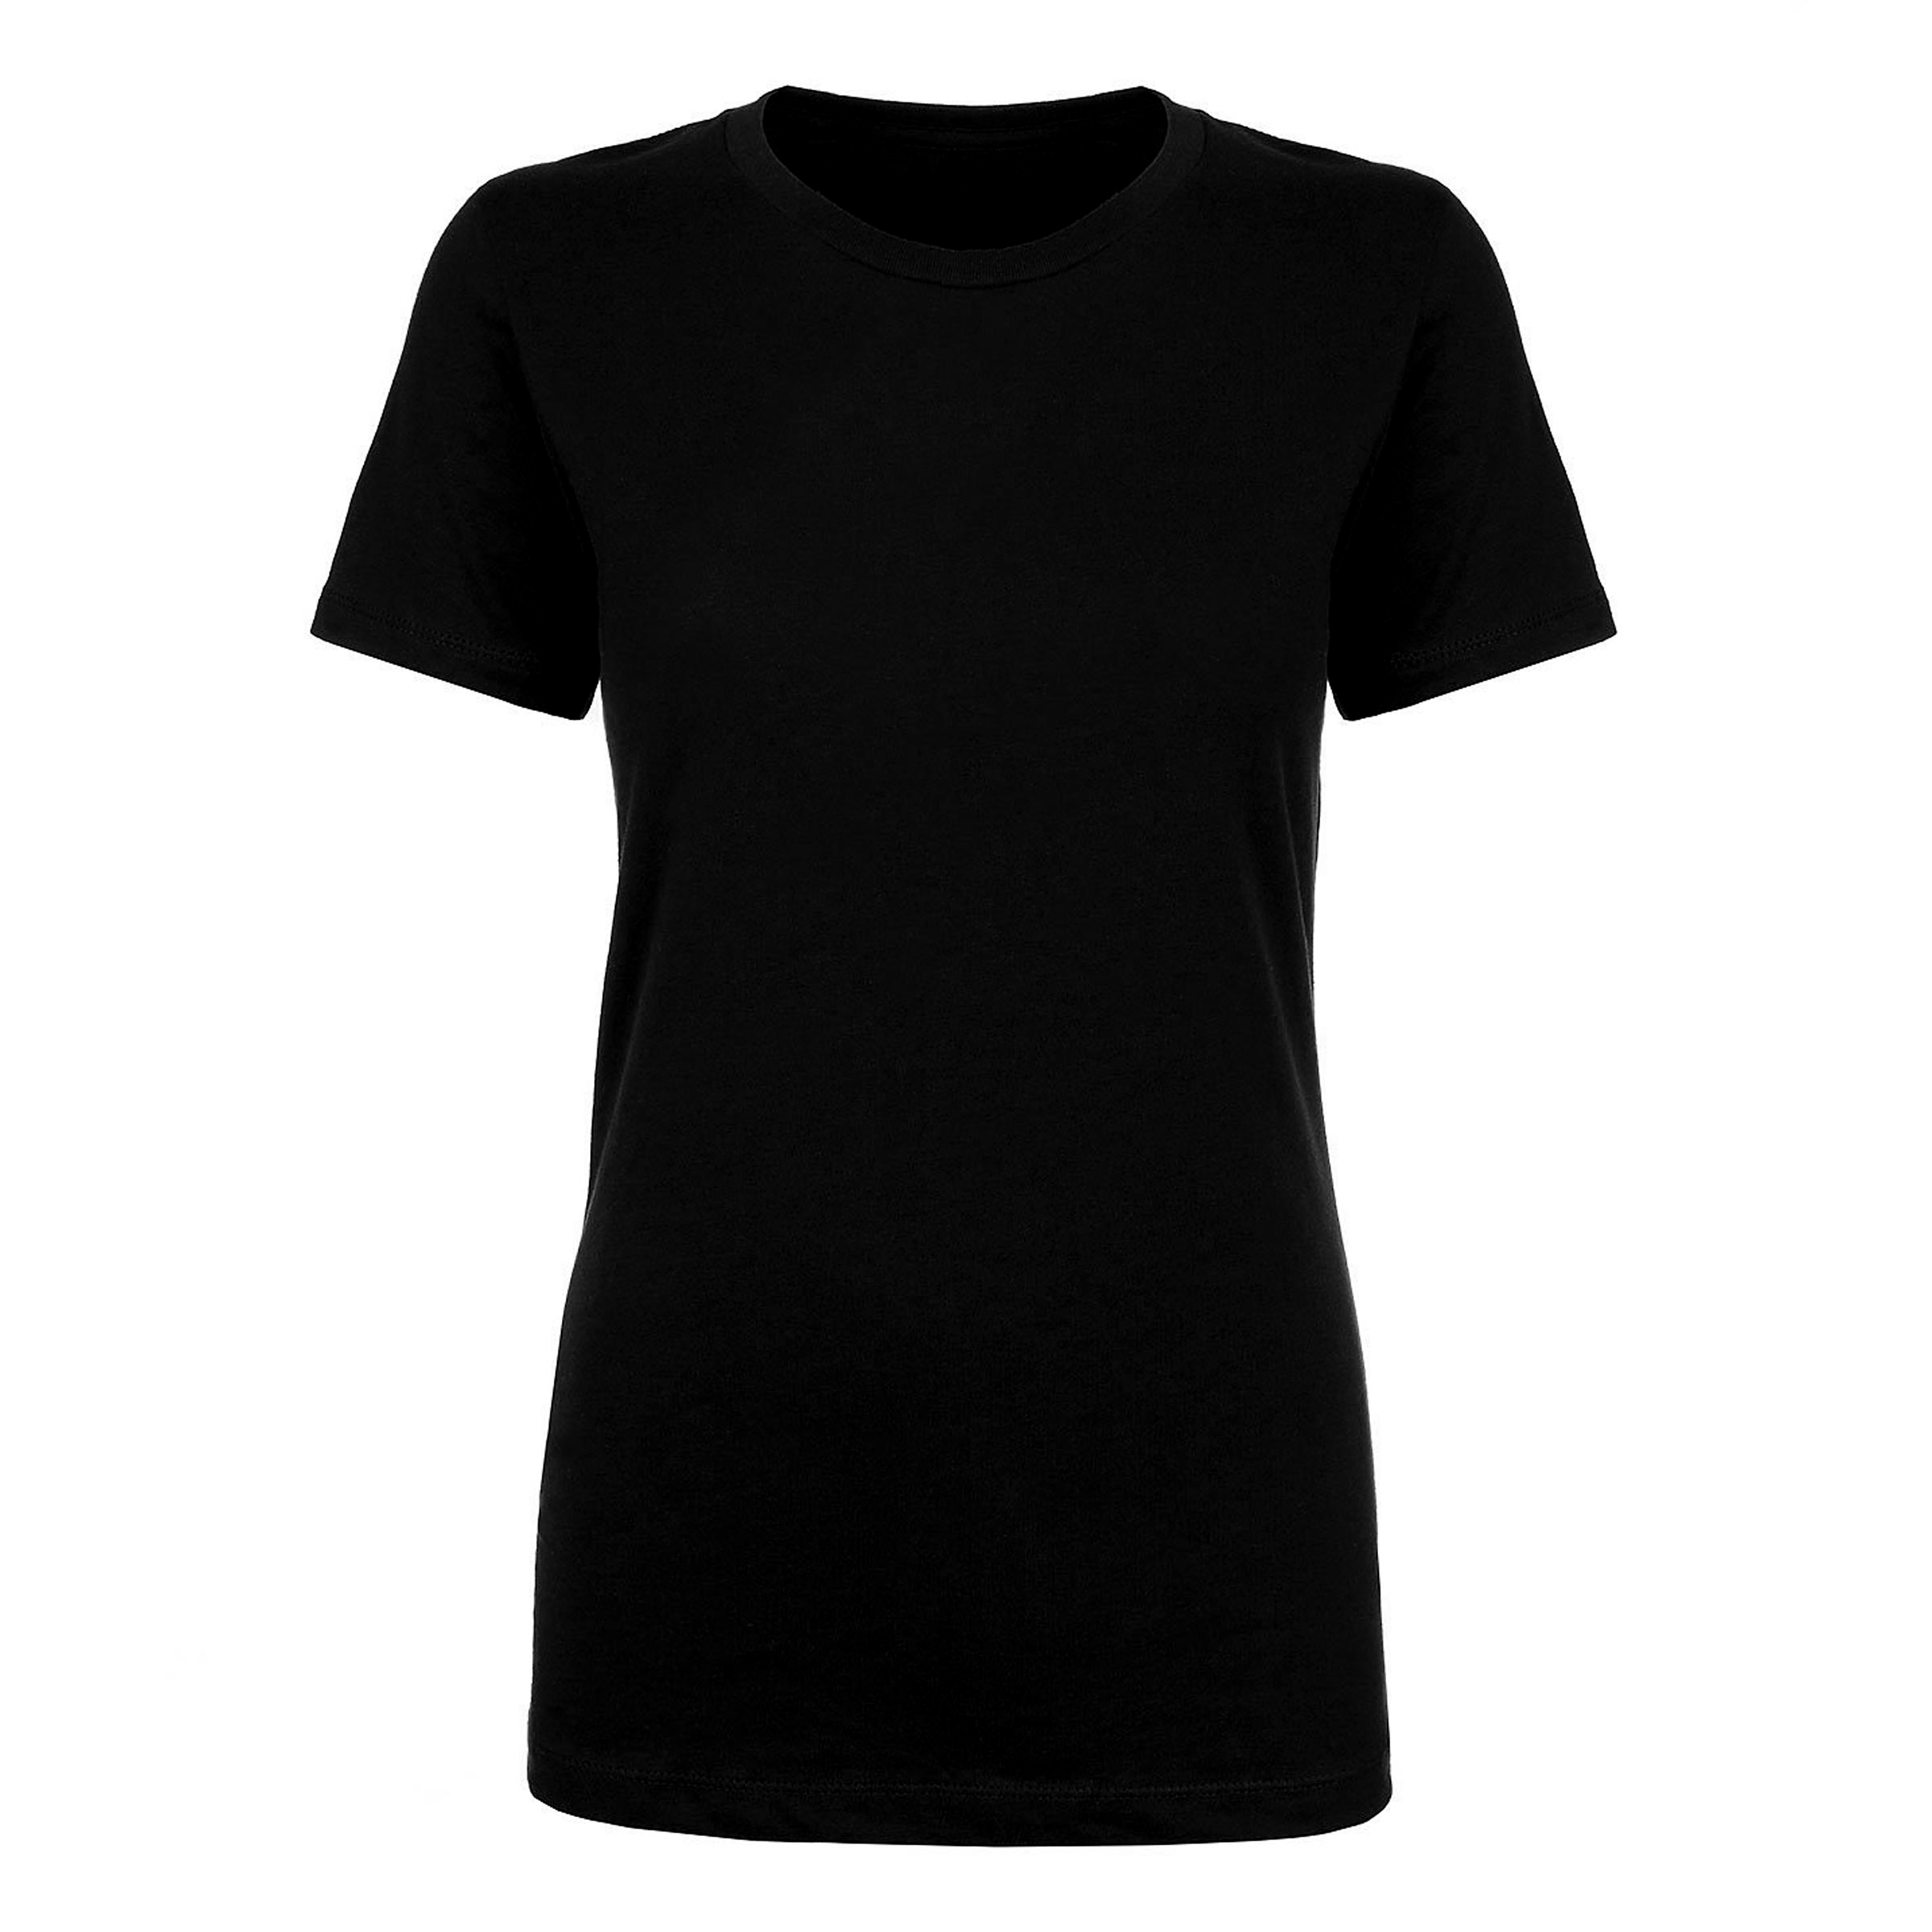 Blank T-shirts – Order Blank Shirts for Your Group